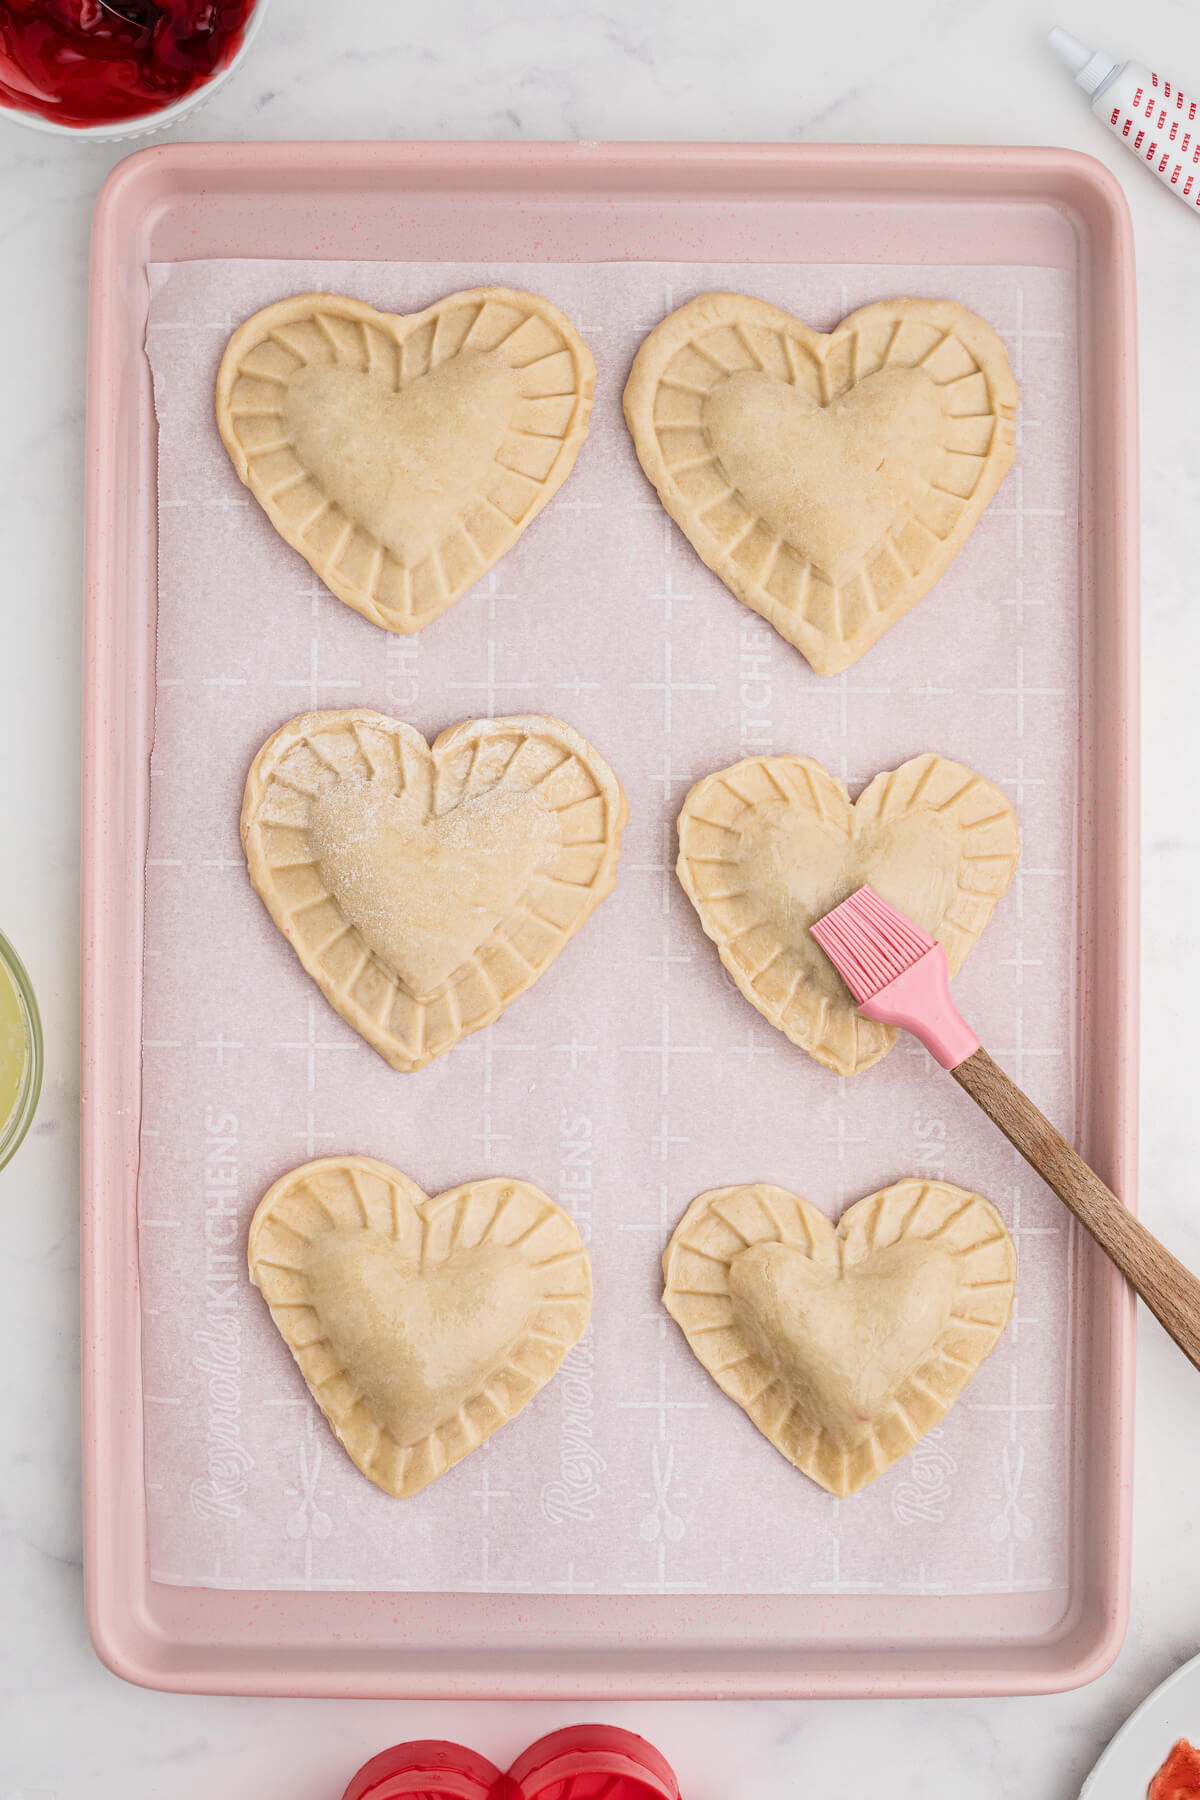 A pink baking sheet full of unbaked heart shaped individual cherry hand pies.